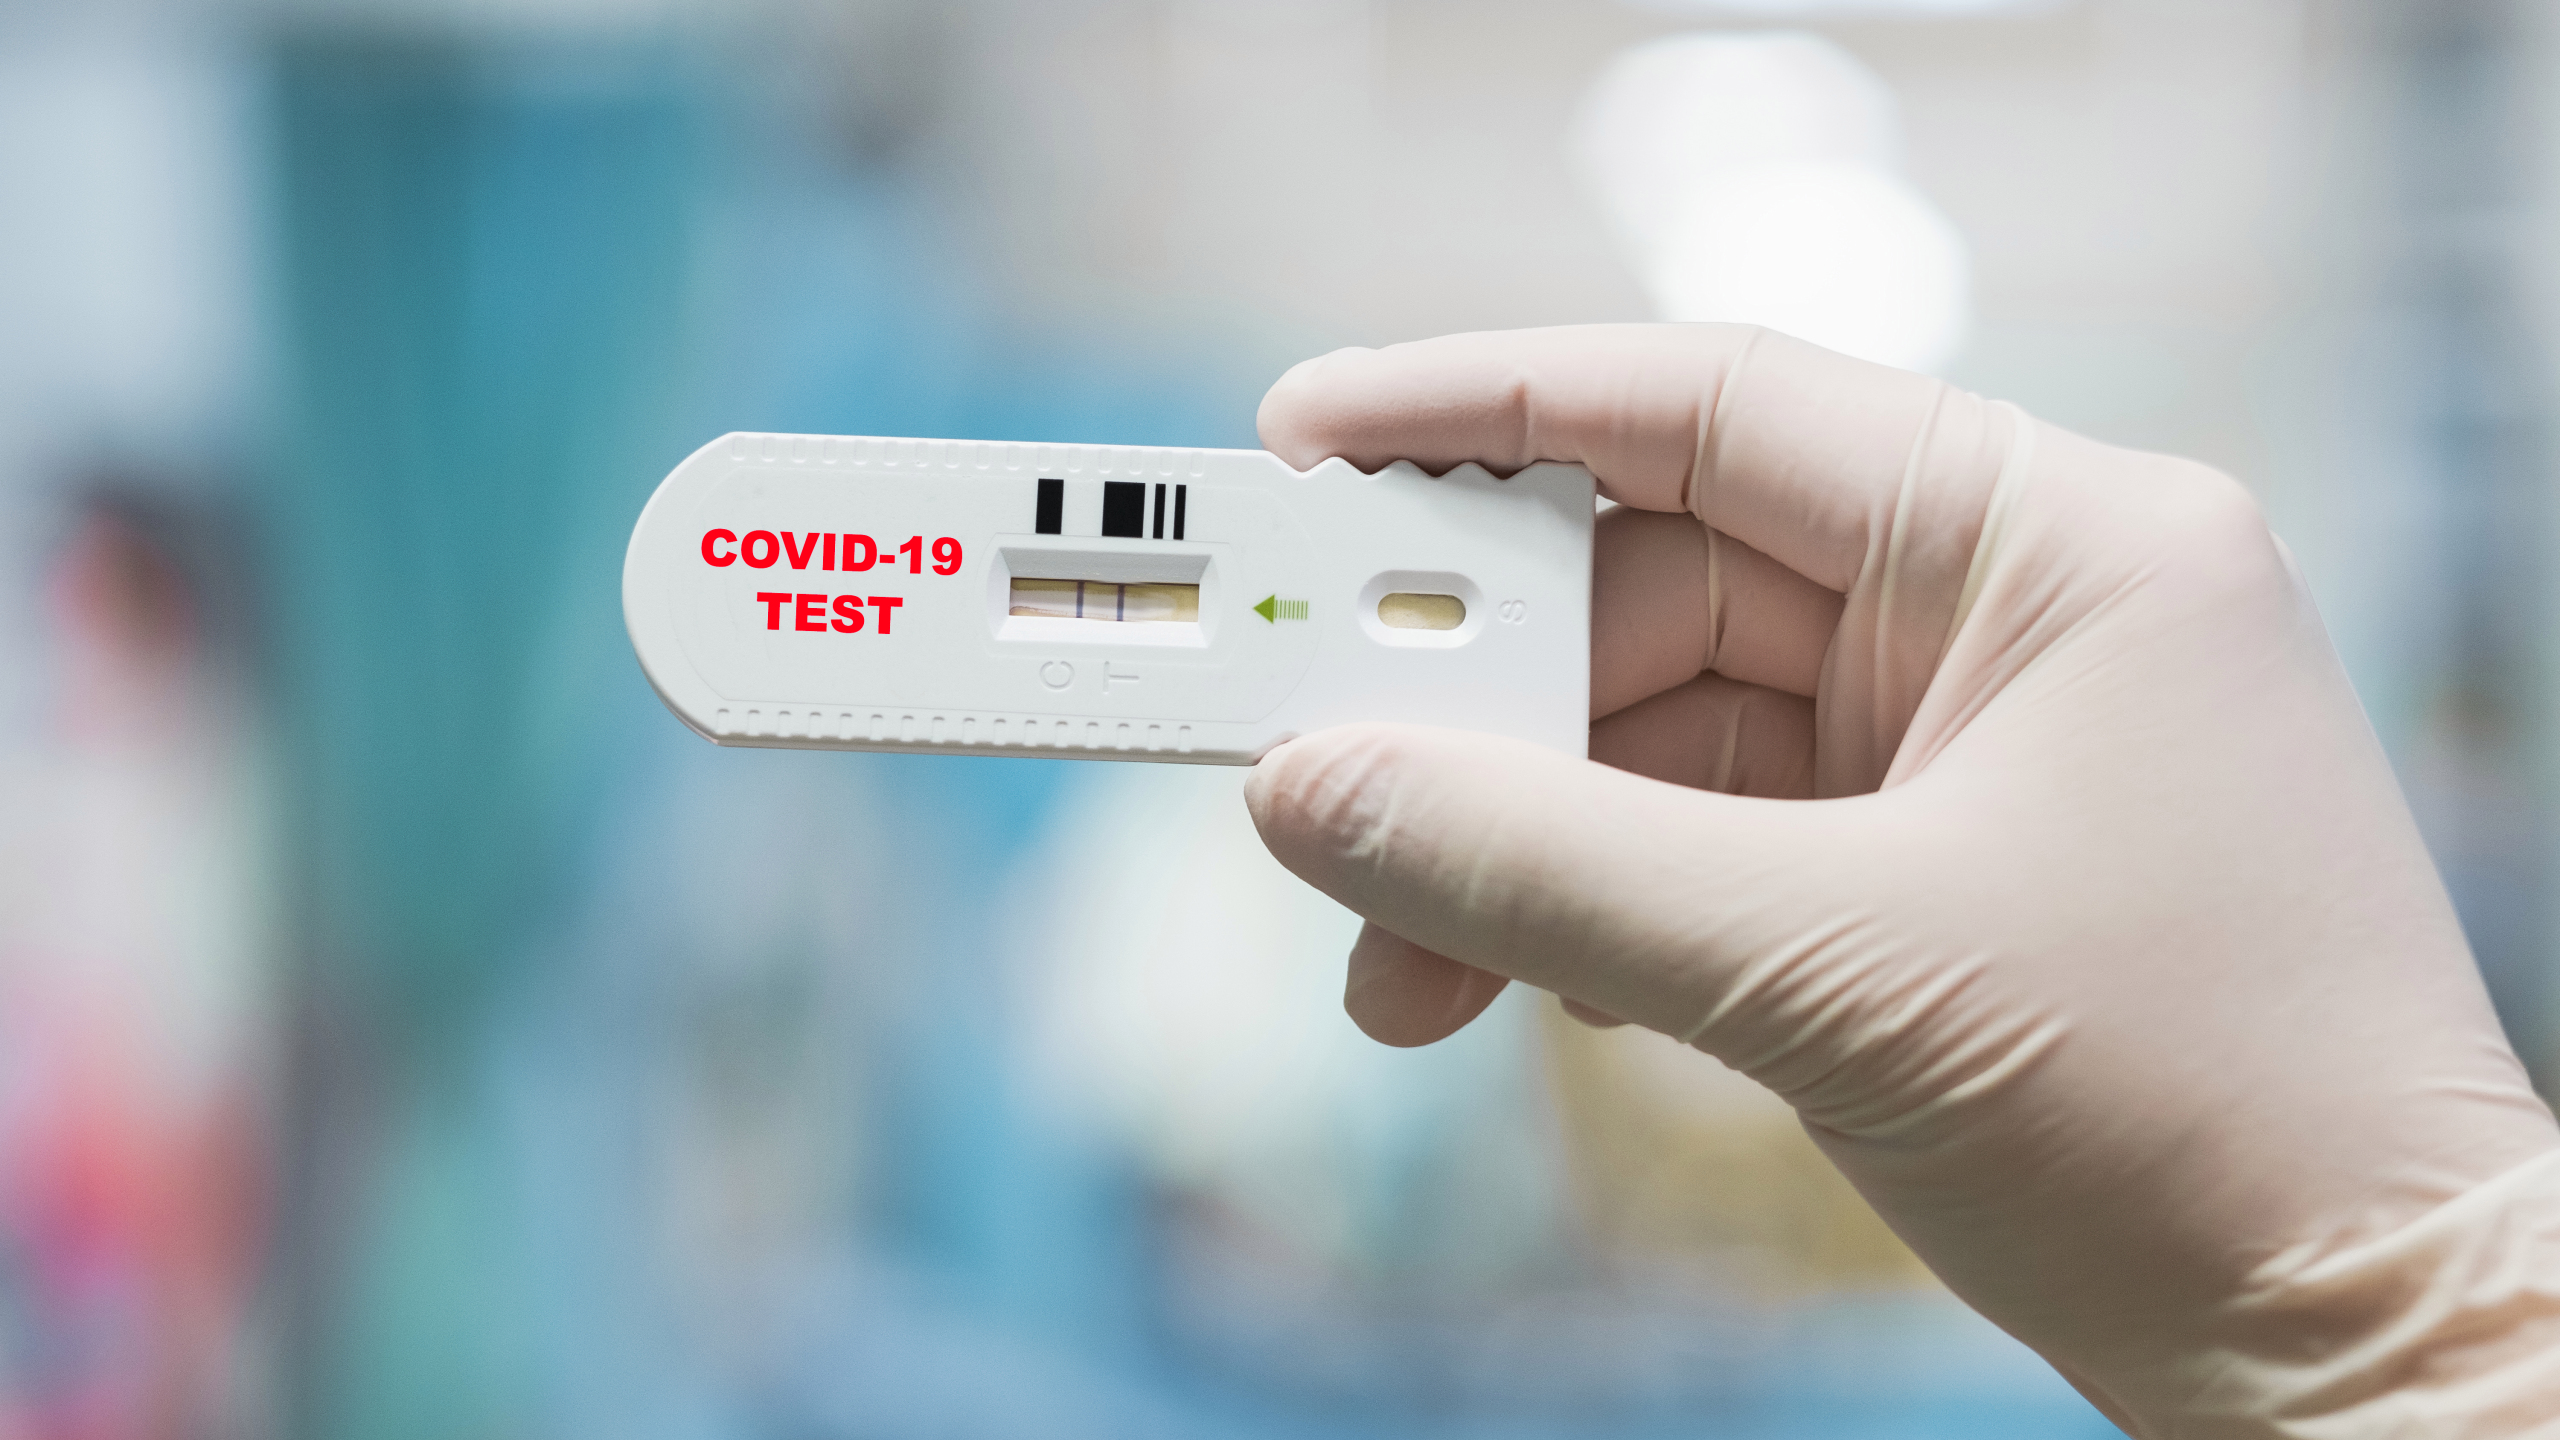 S. Sudan confirms 20 new cases of Covid-19 on Wednesday